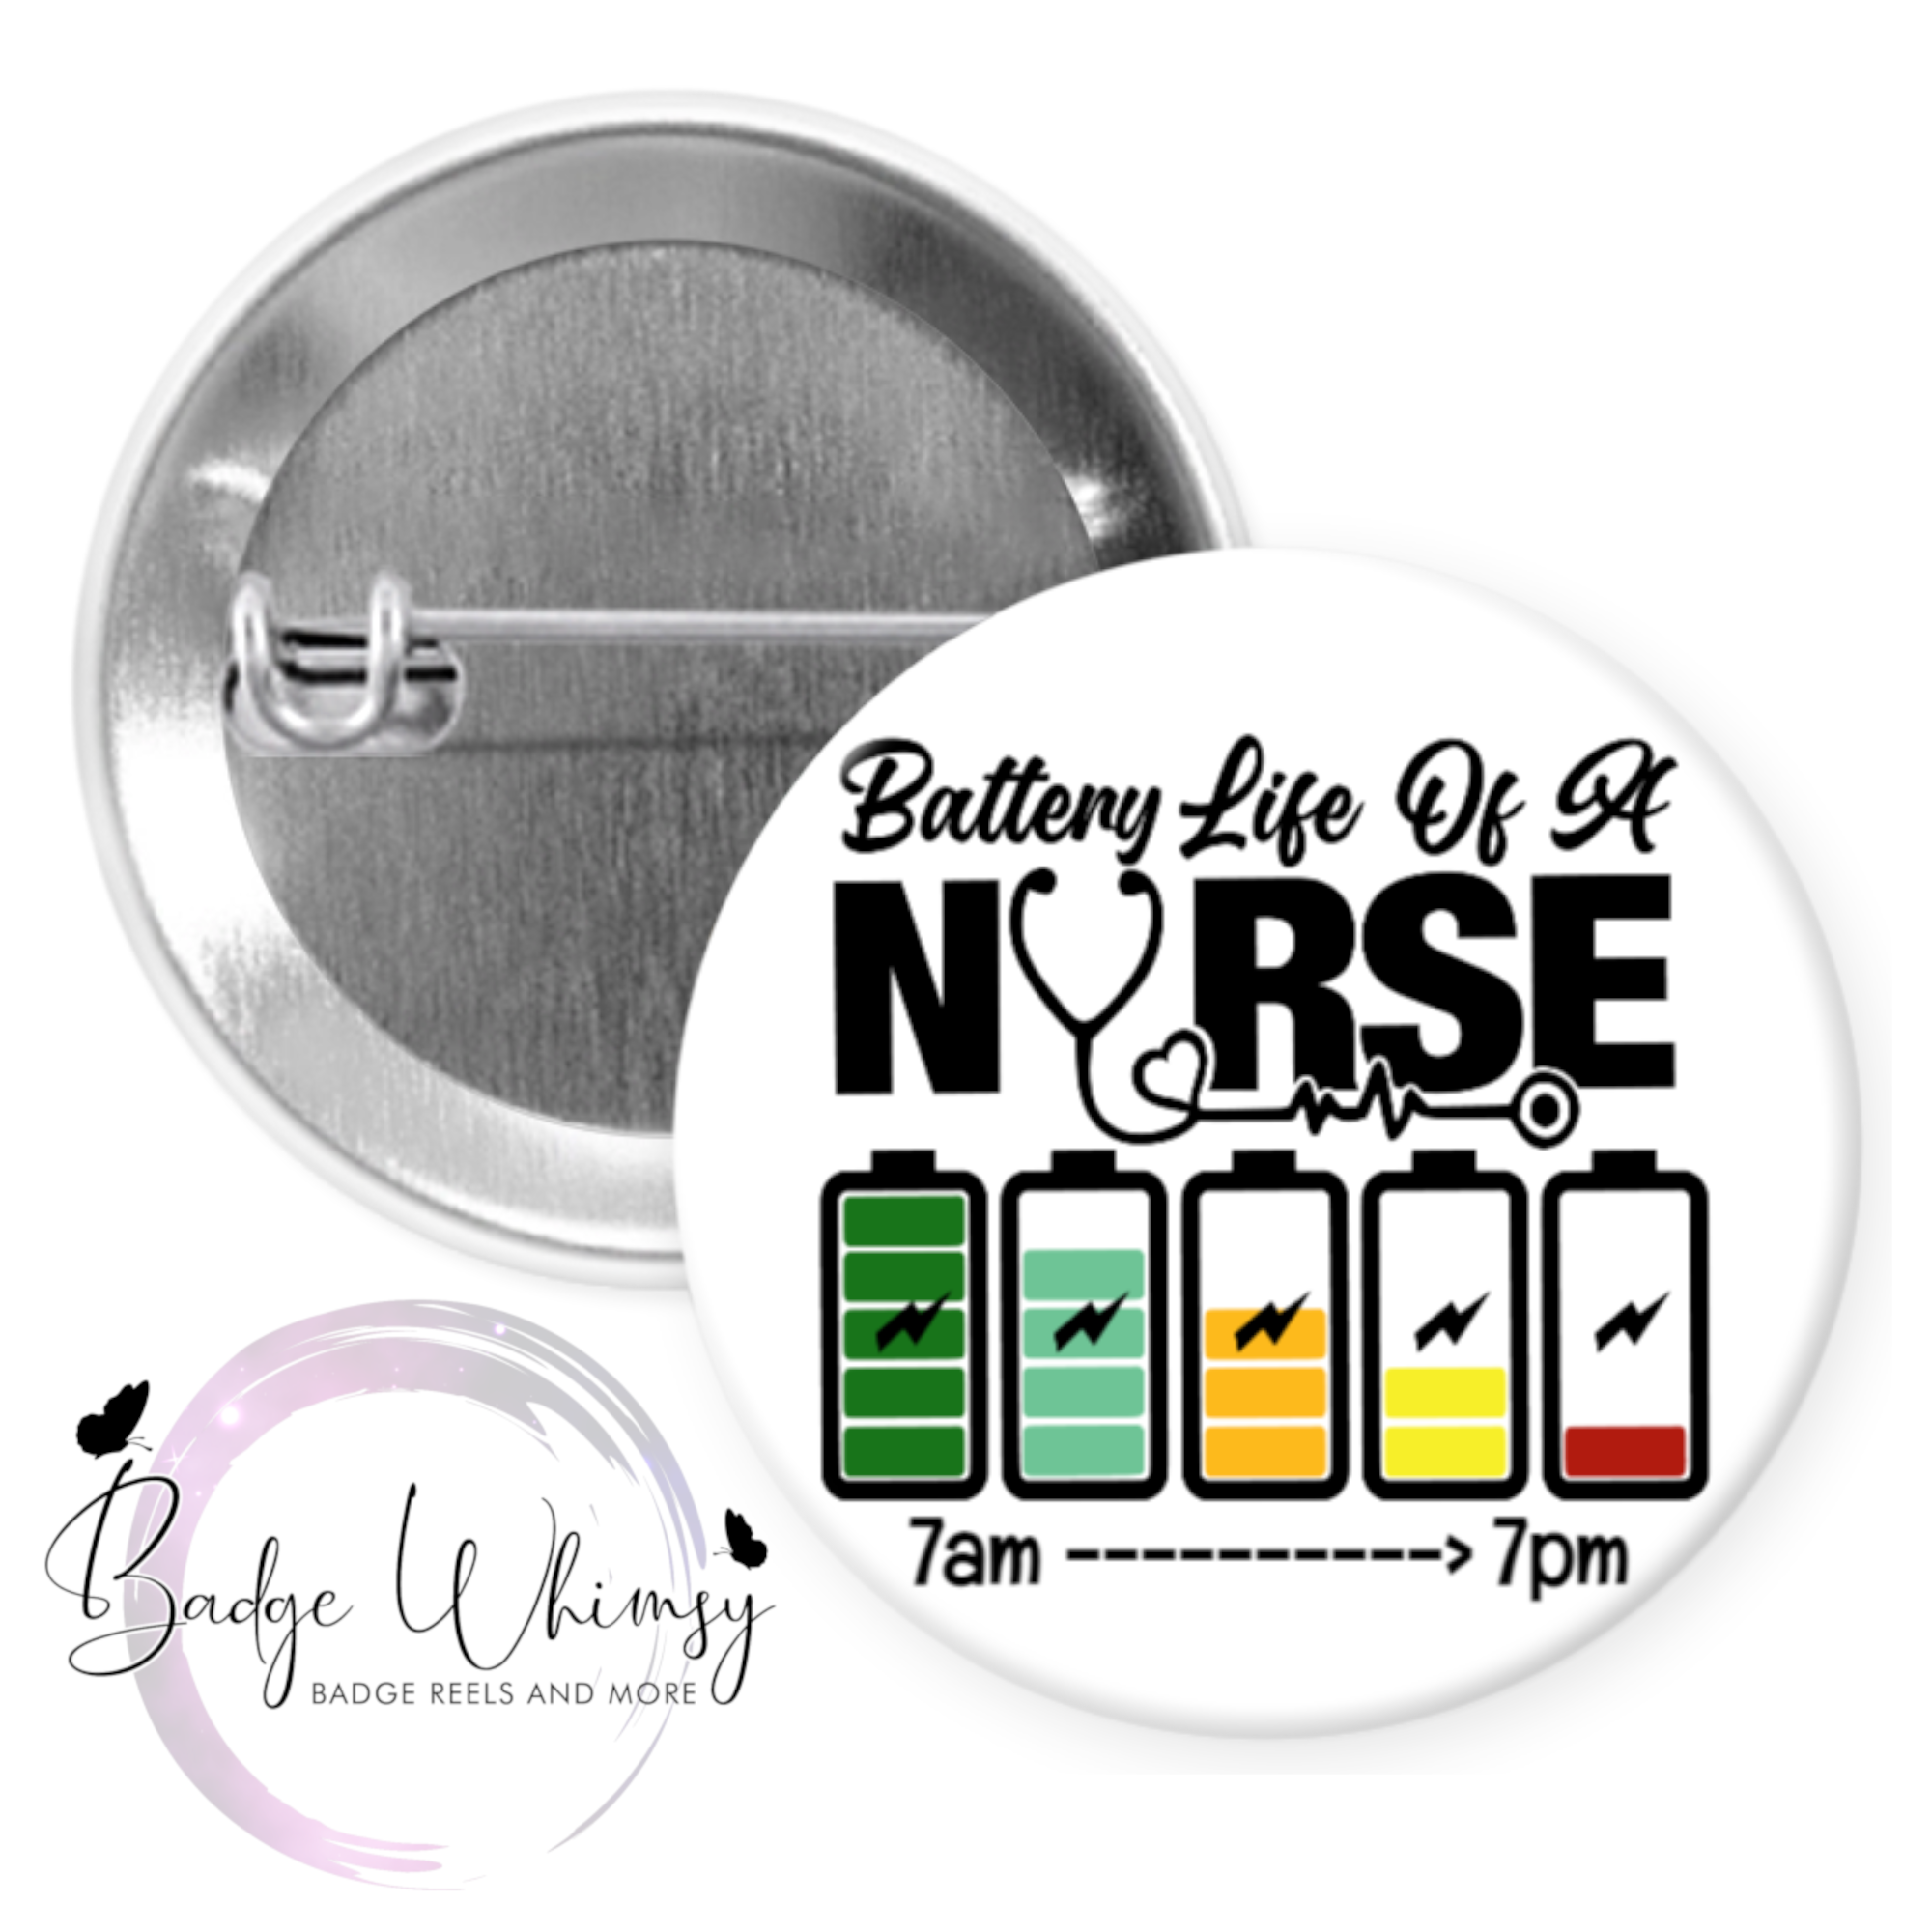 Battery Life of a Nurse - Day Shift or Night Shift Option - Pin, Magne